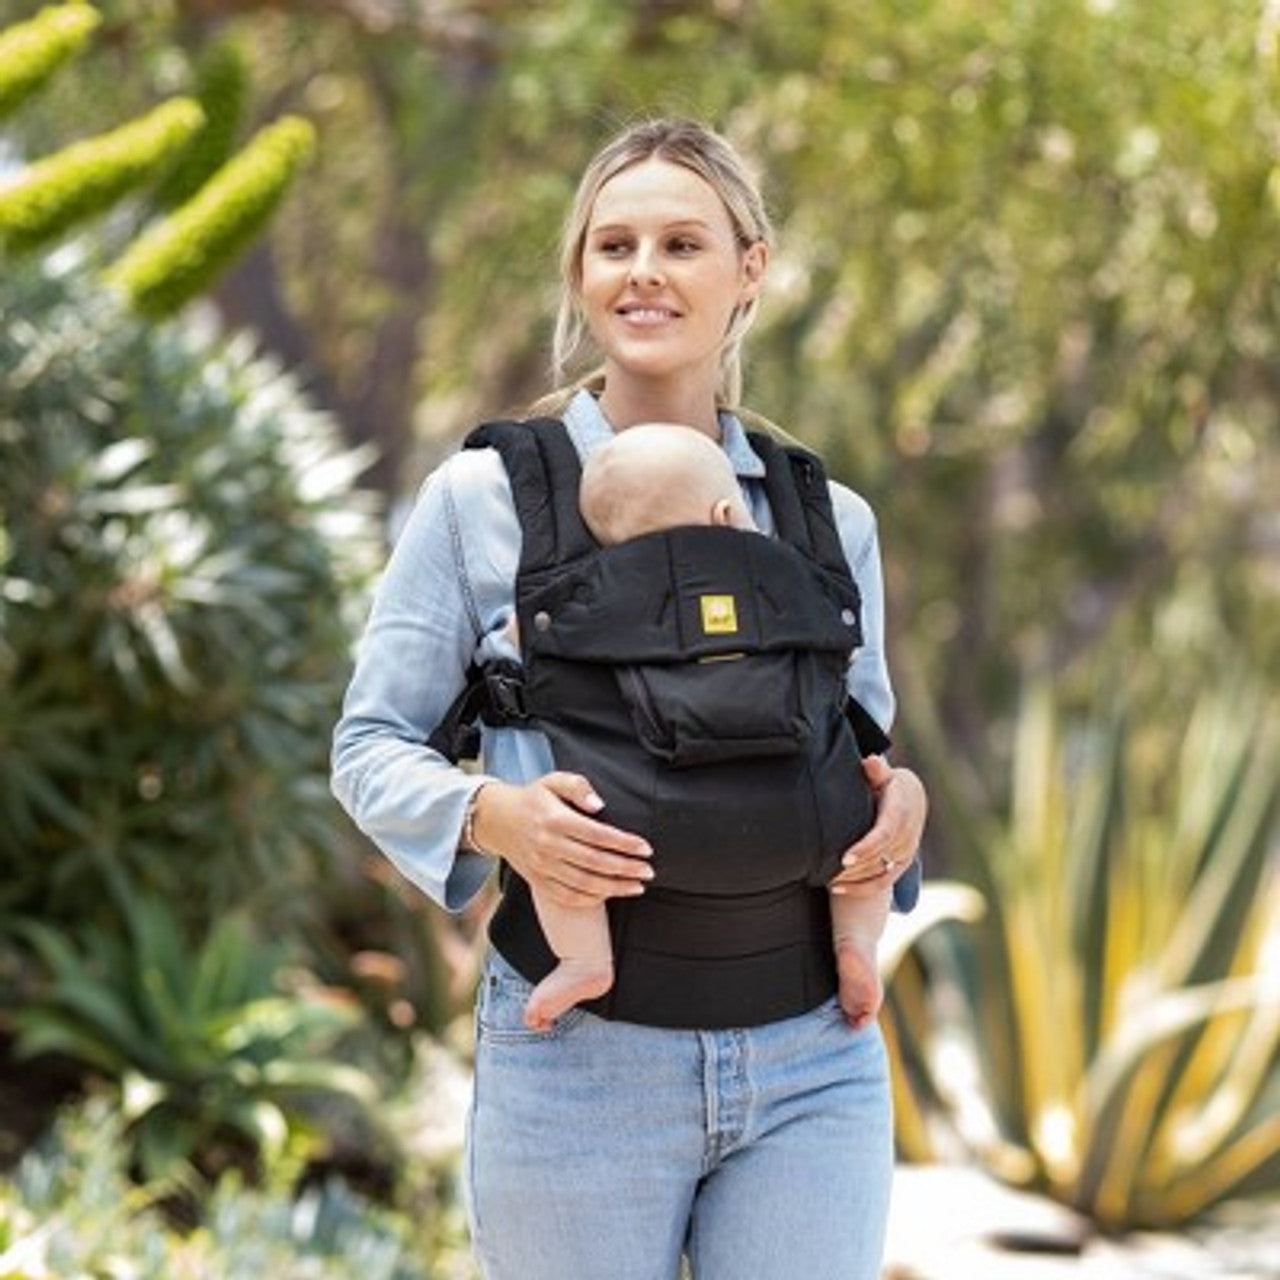 New - LILLEbaby Complete Original 6-in-1 Baby Carrier - Black